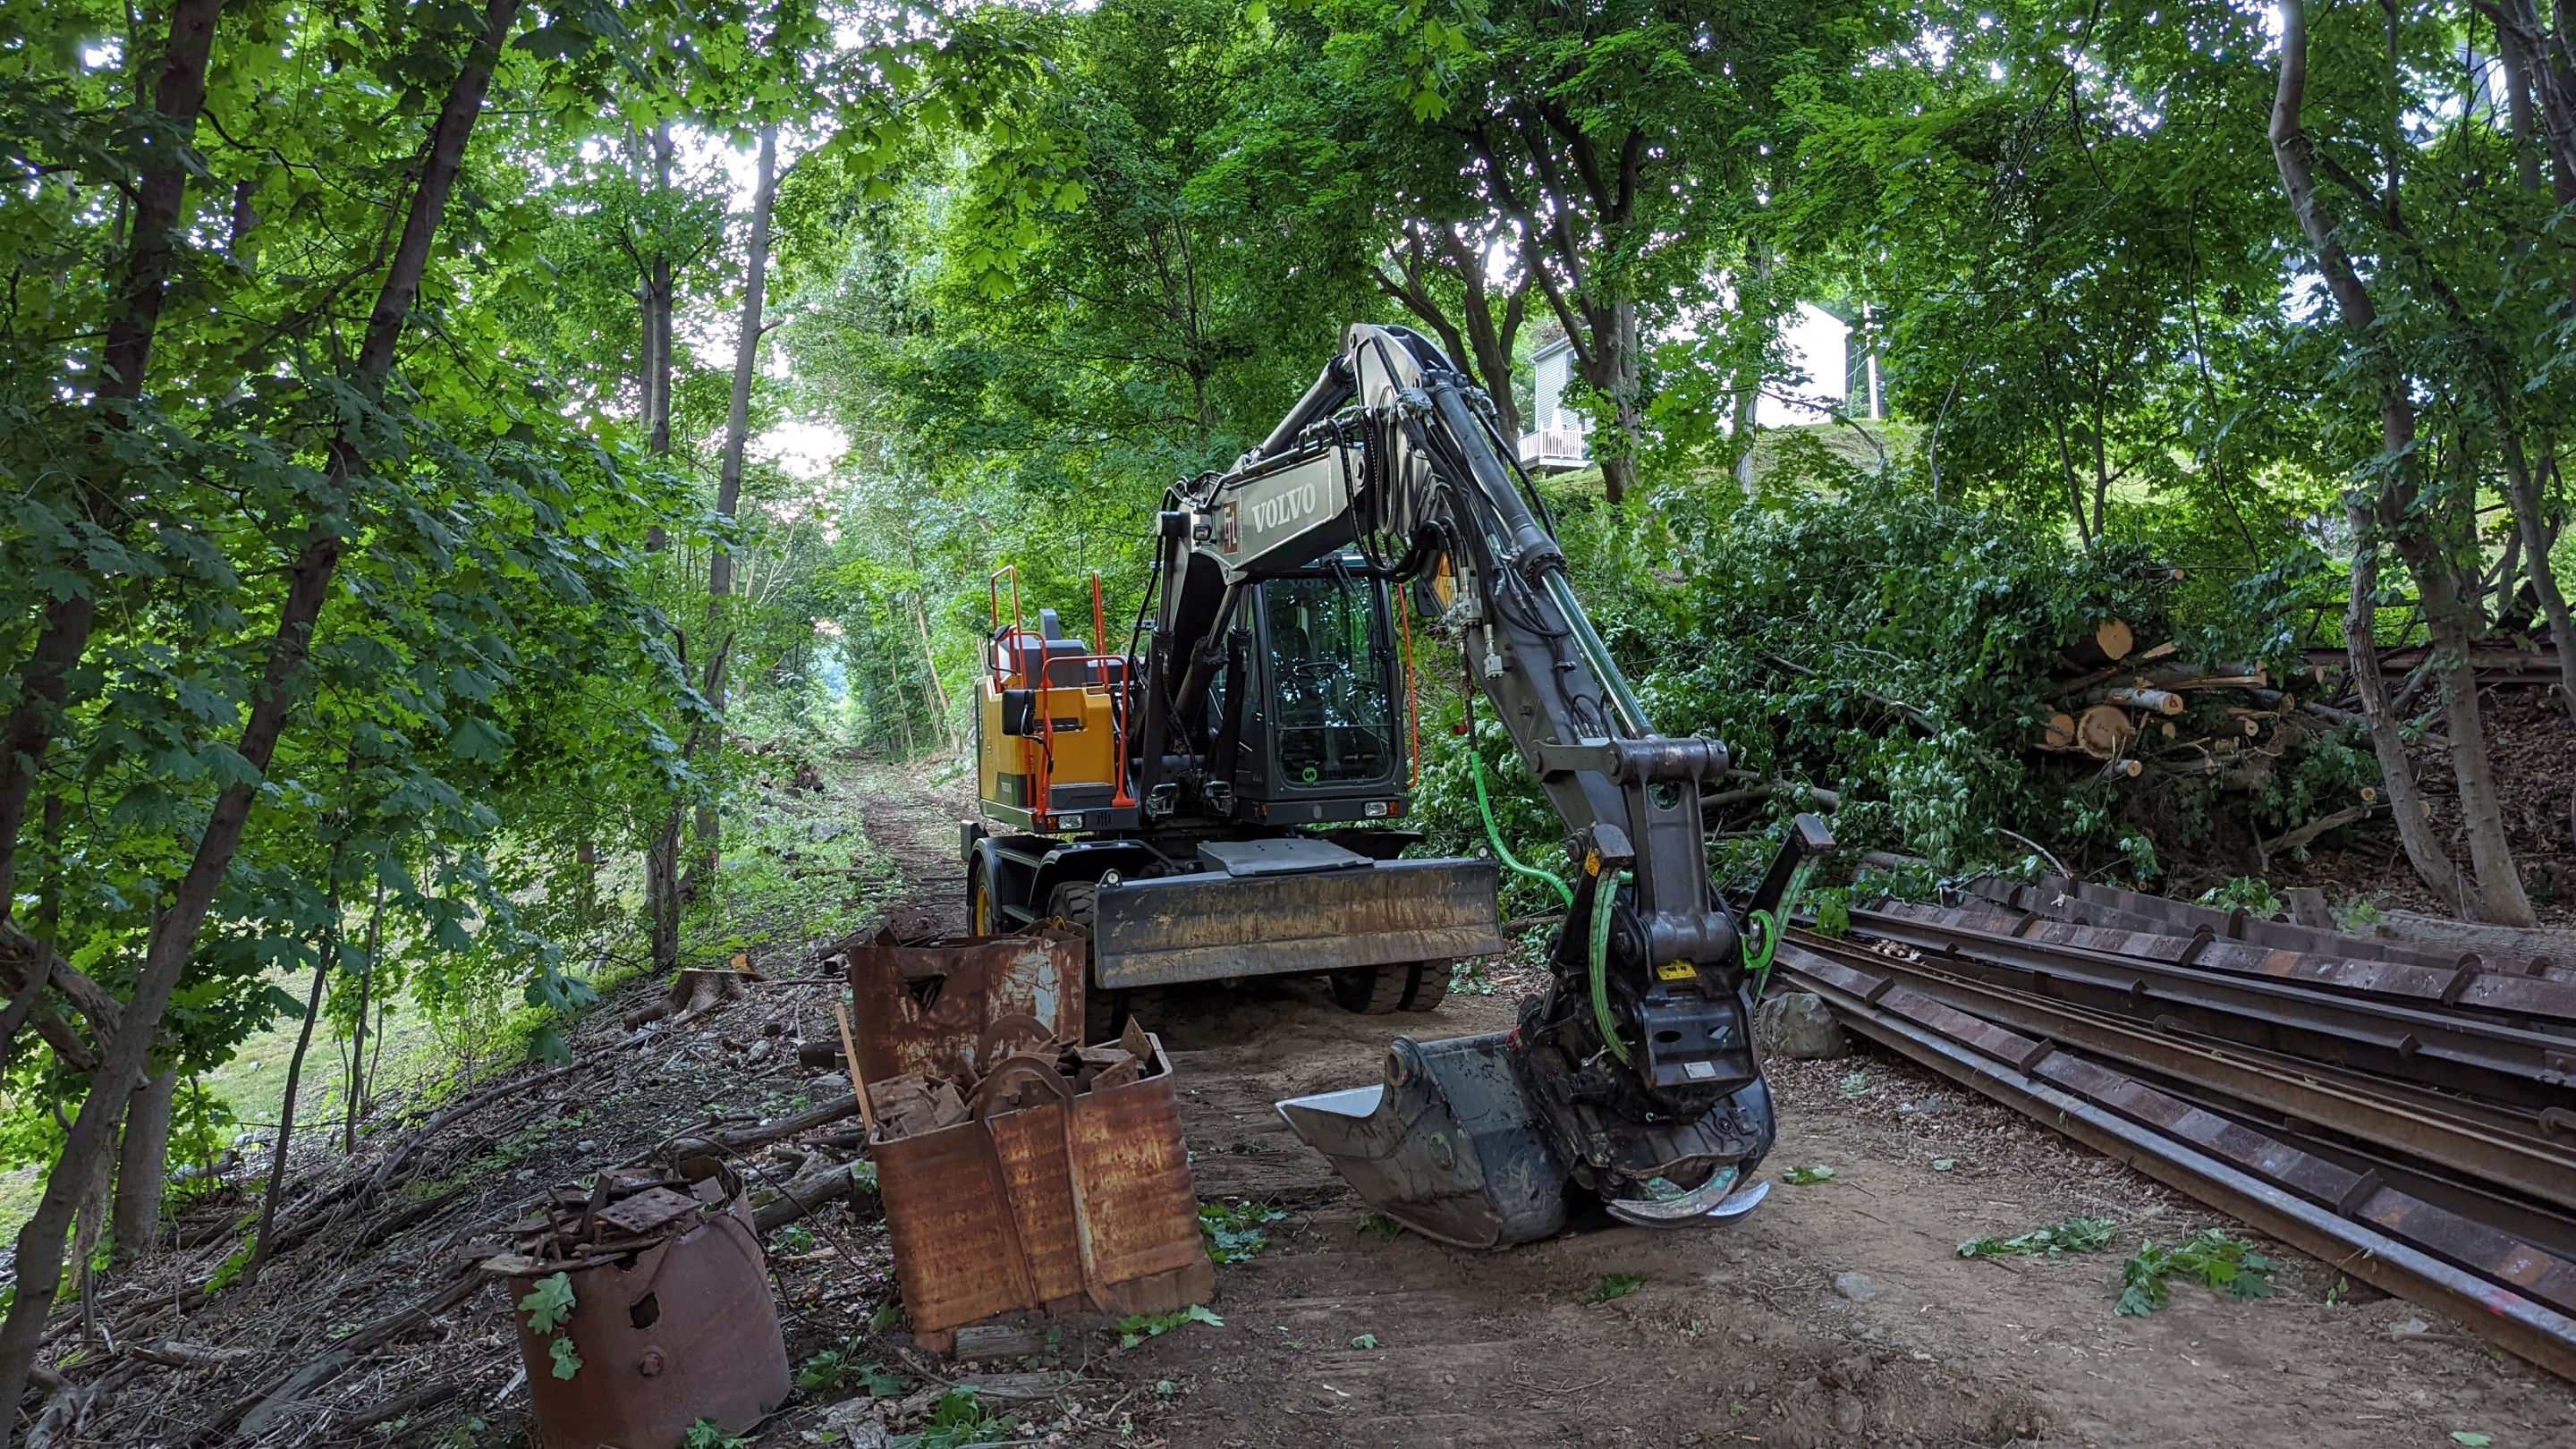 A backhoe rests on top of old railroad ties next to a pile of old rails along an abanoned railroad corridor surrounded by leafy trees.